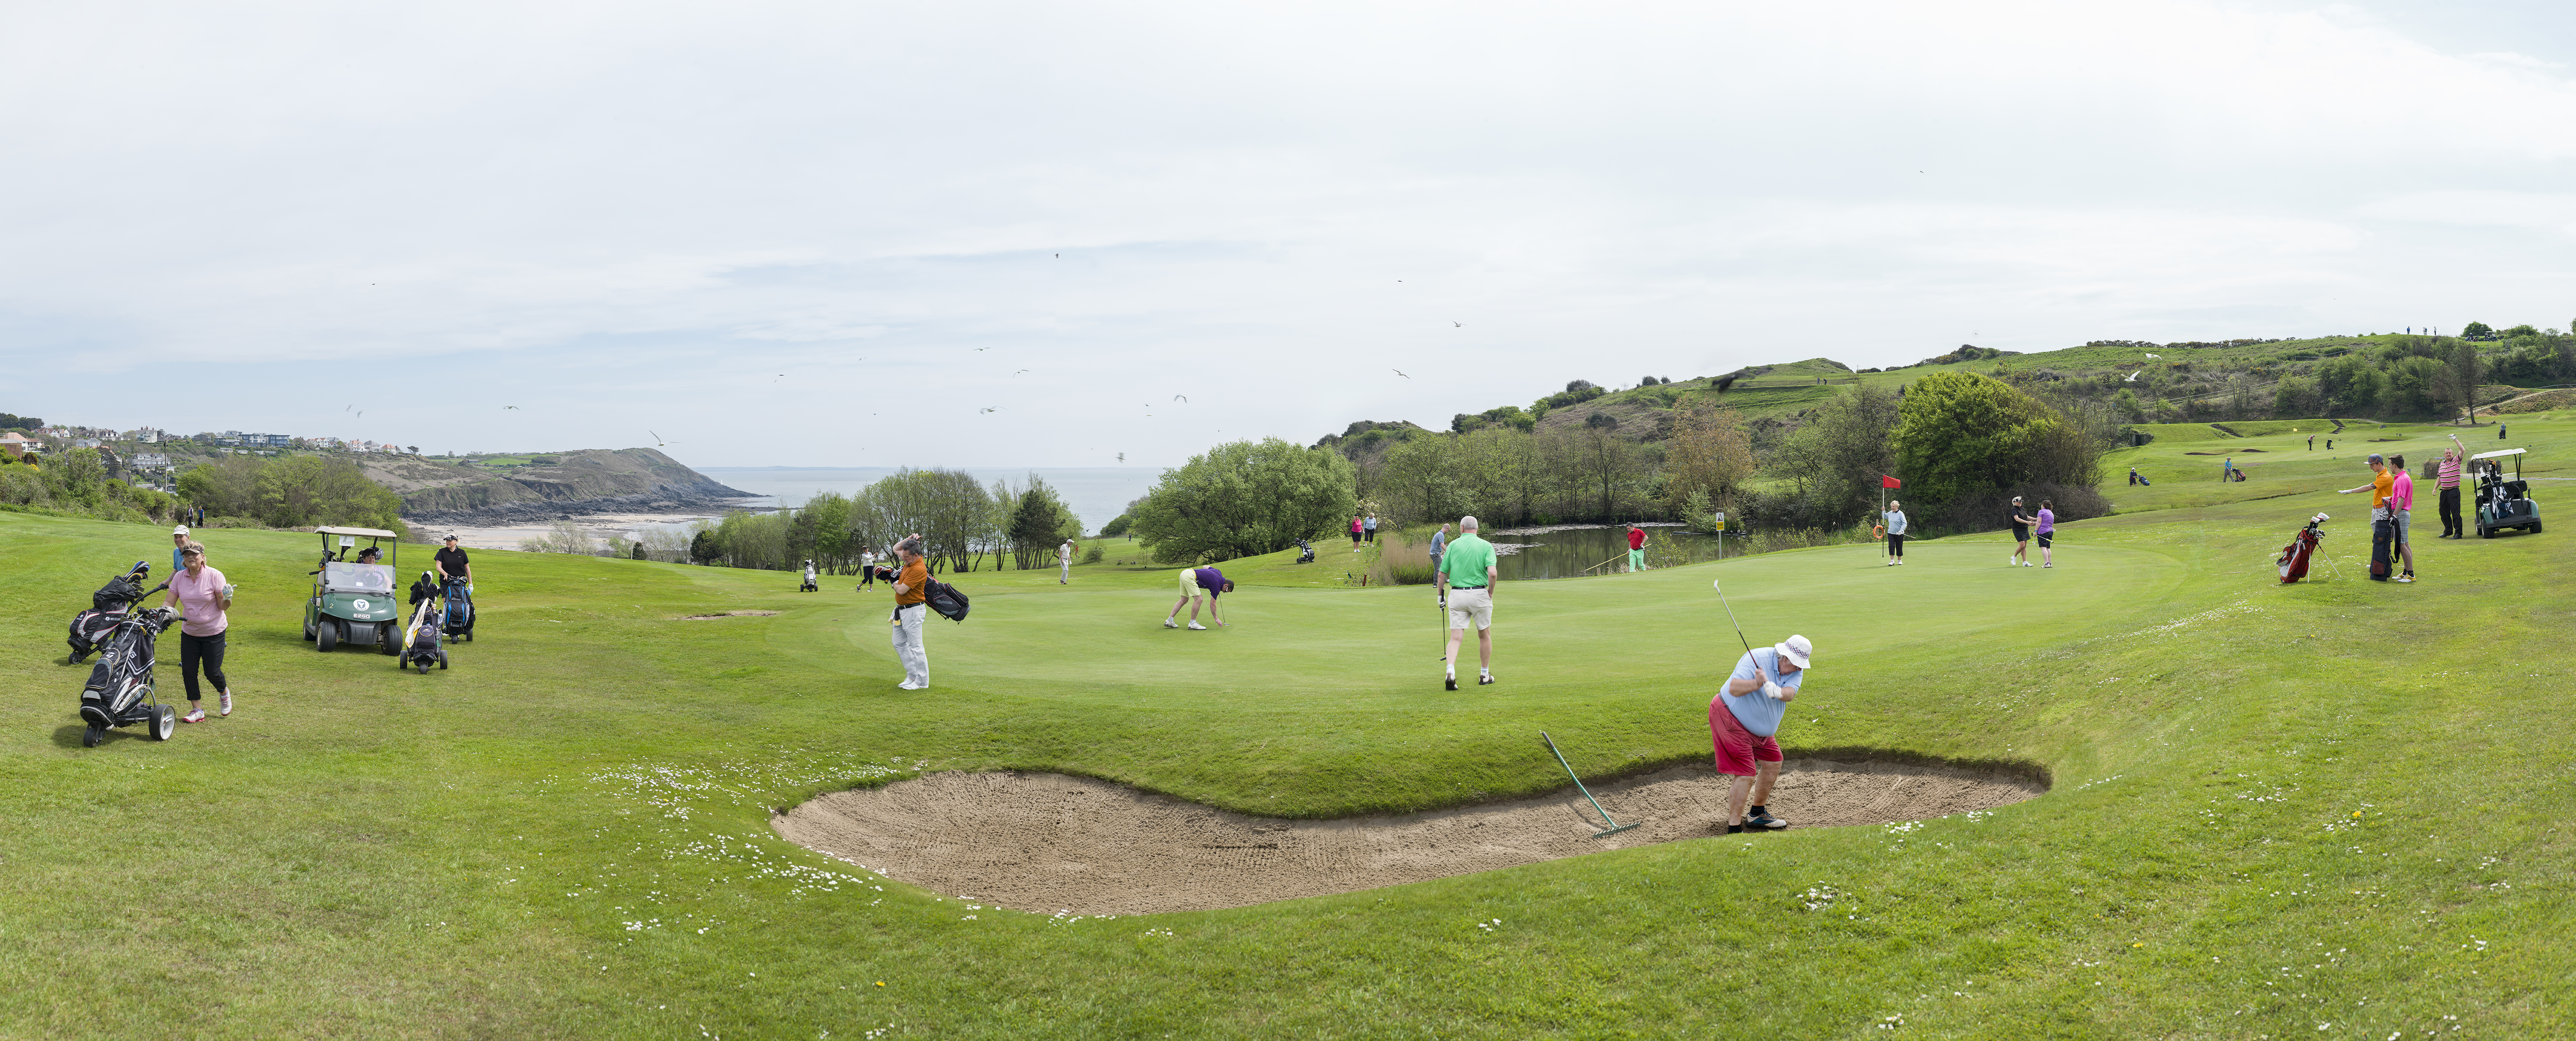 Langland Bay Golf Club (from the series Pleasure Park) (2016)